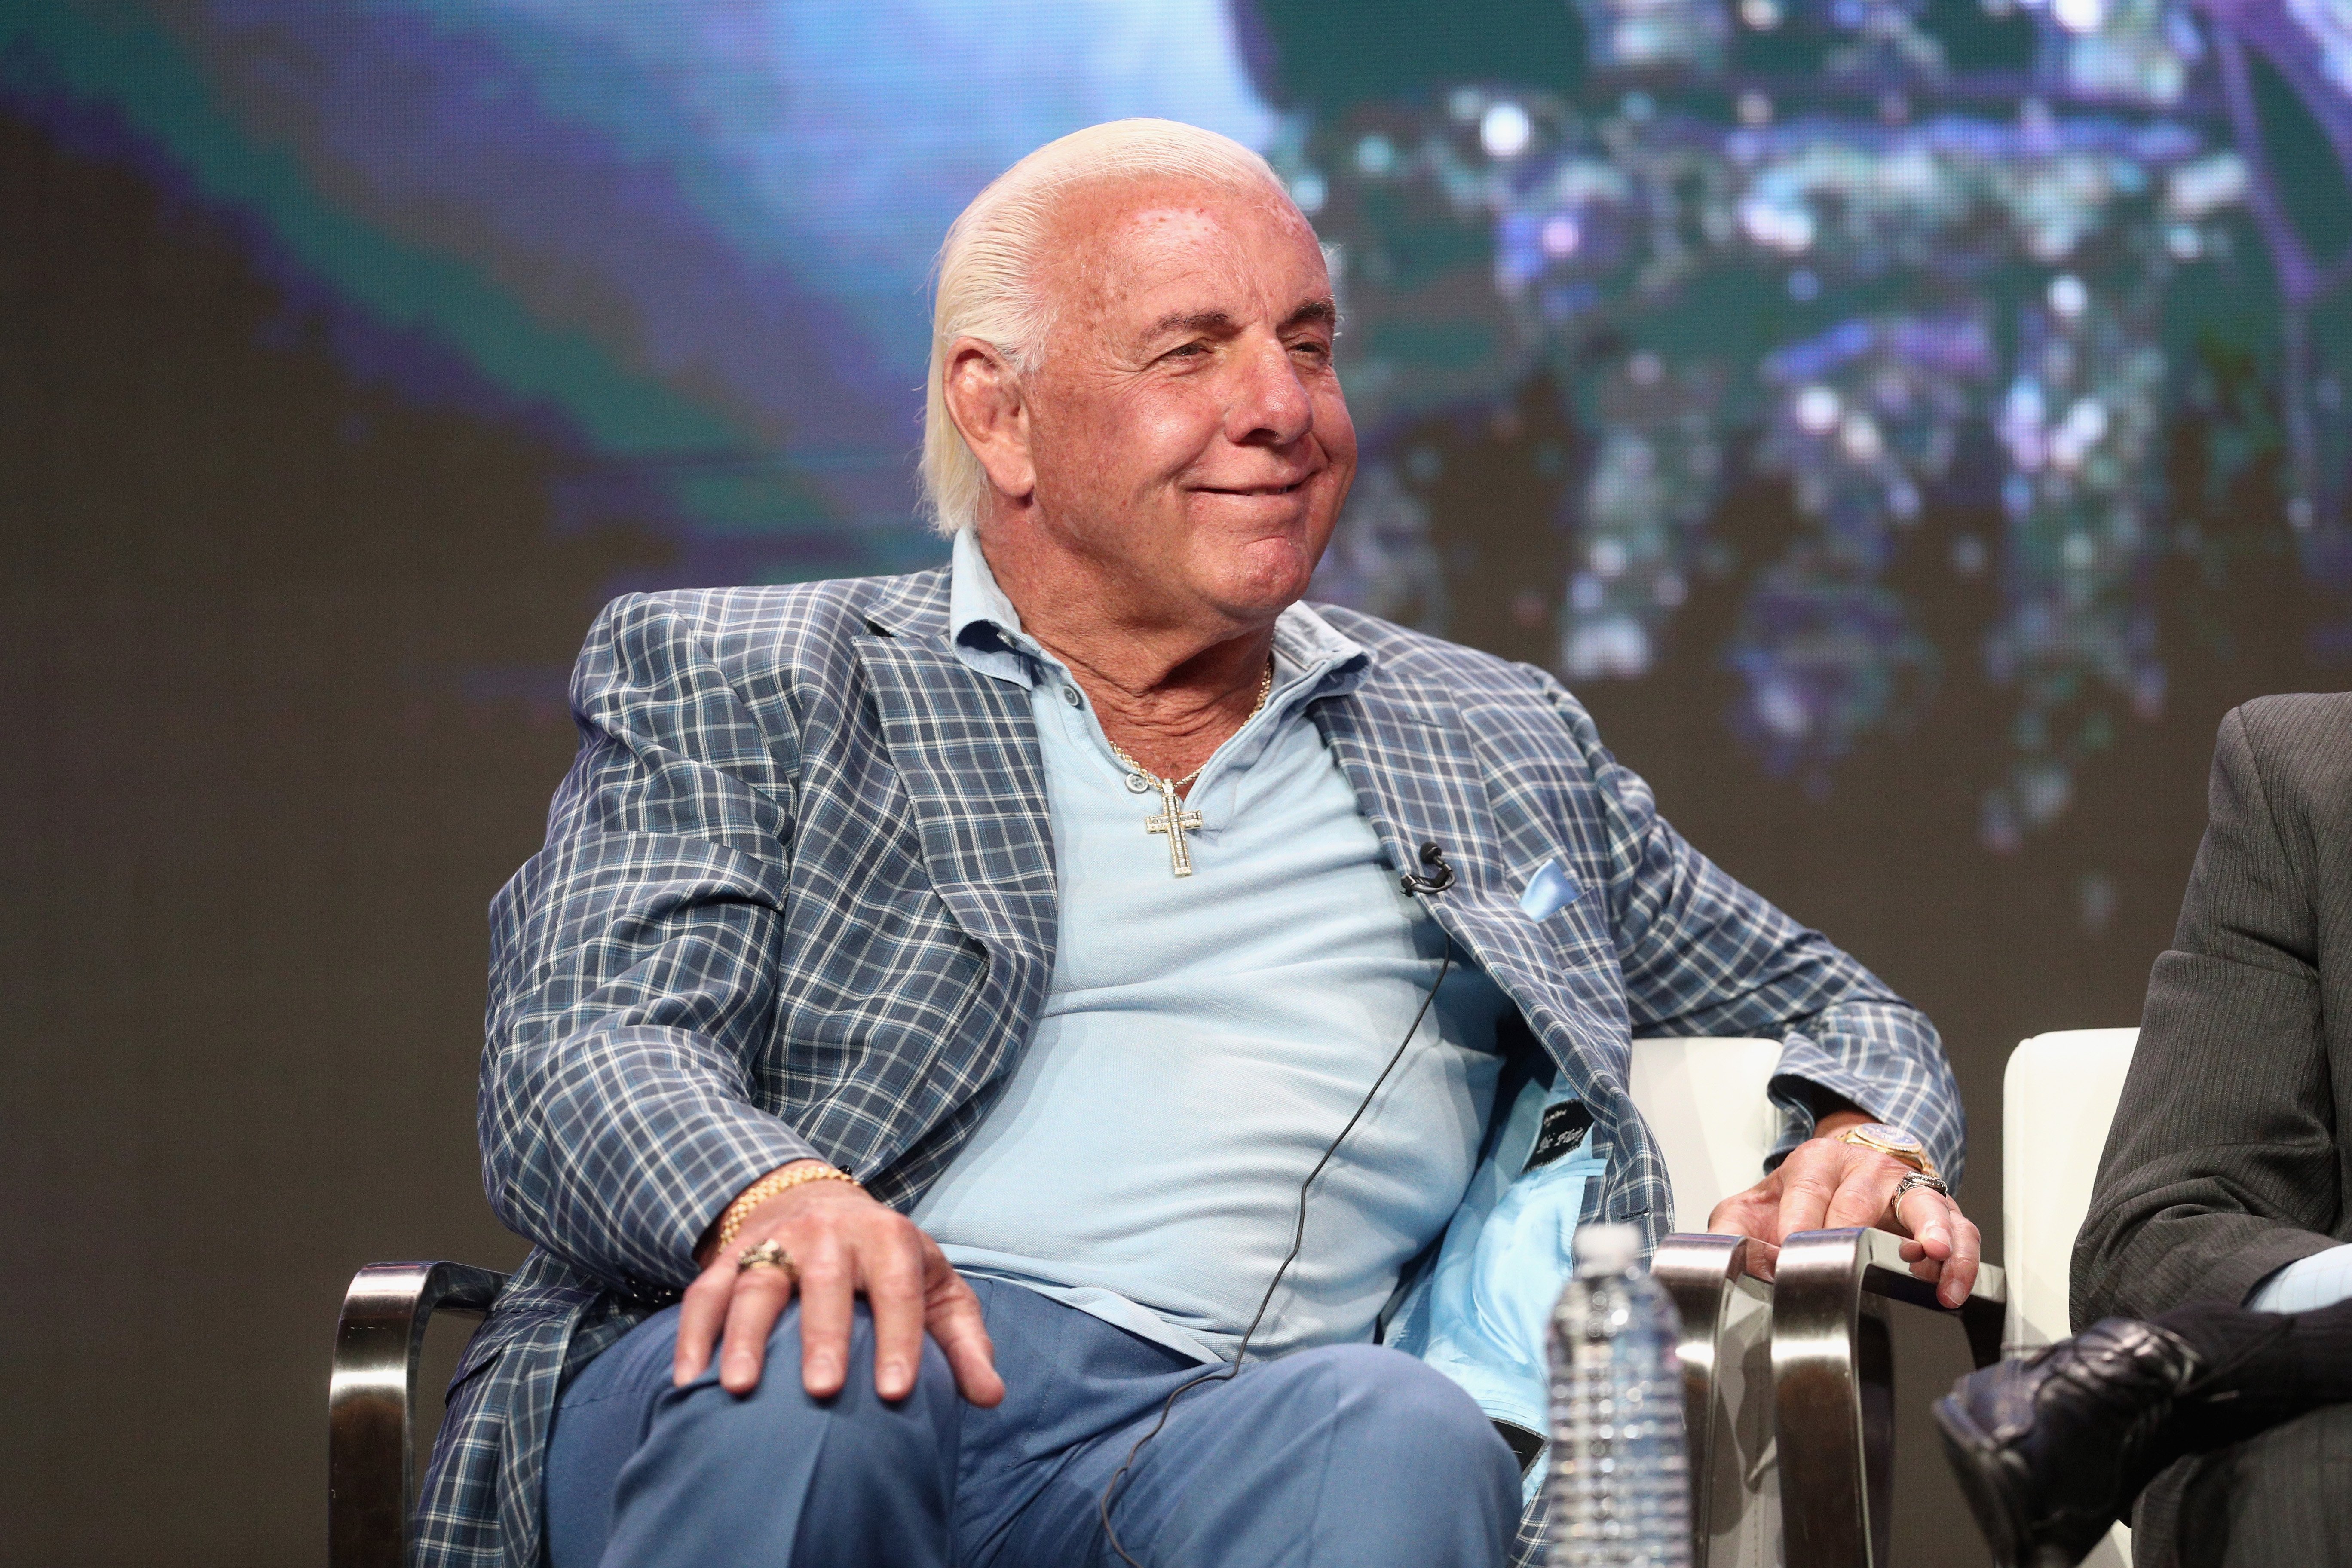 Ric Flair speaks onstage during the ESPN portion of the 2017 Summer Television Critics Association Press Tour. Photo: Getty Images/GlobalImagesUkraine